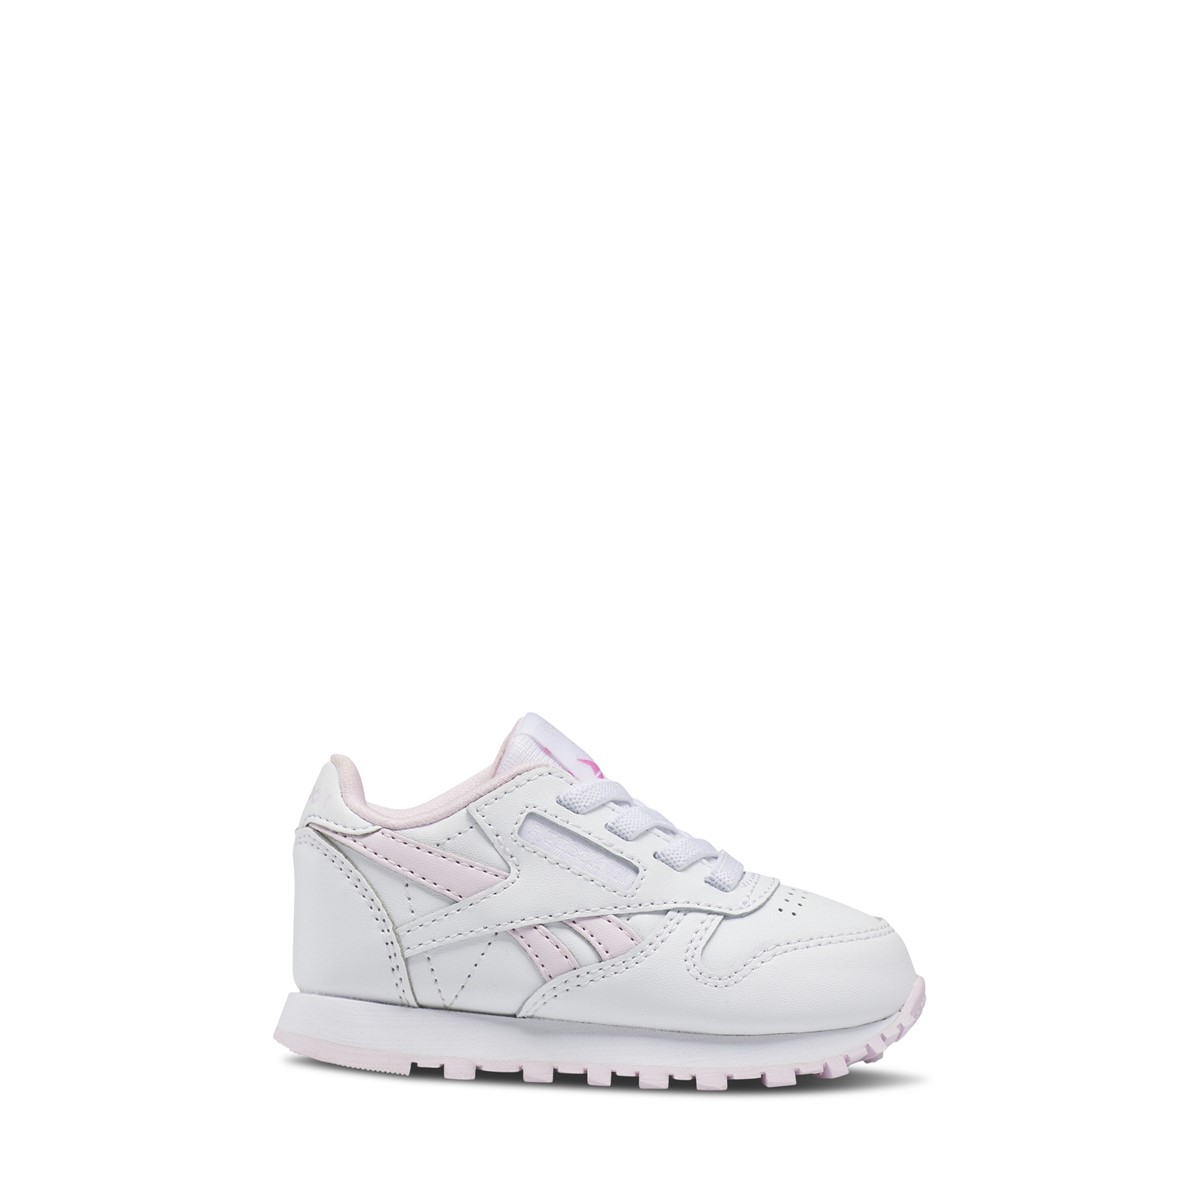 Toddler's Classic Leather Sneakers in White/Pink